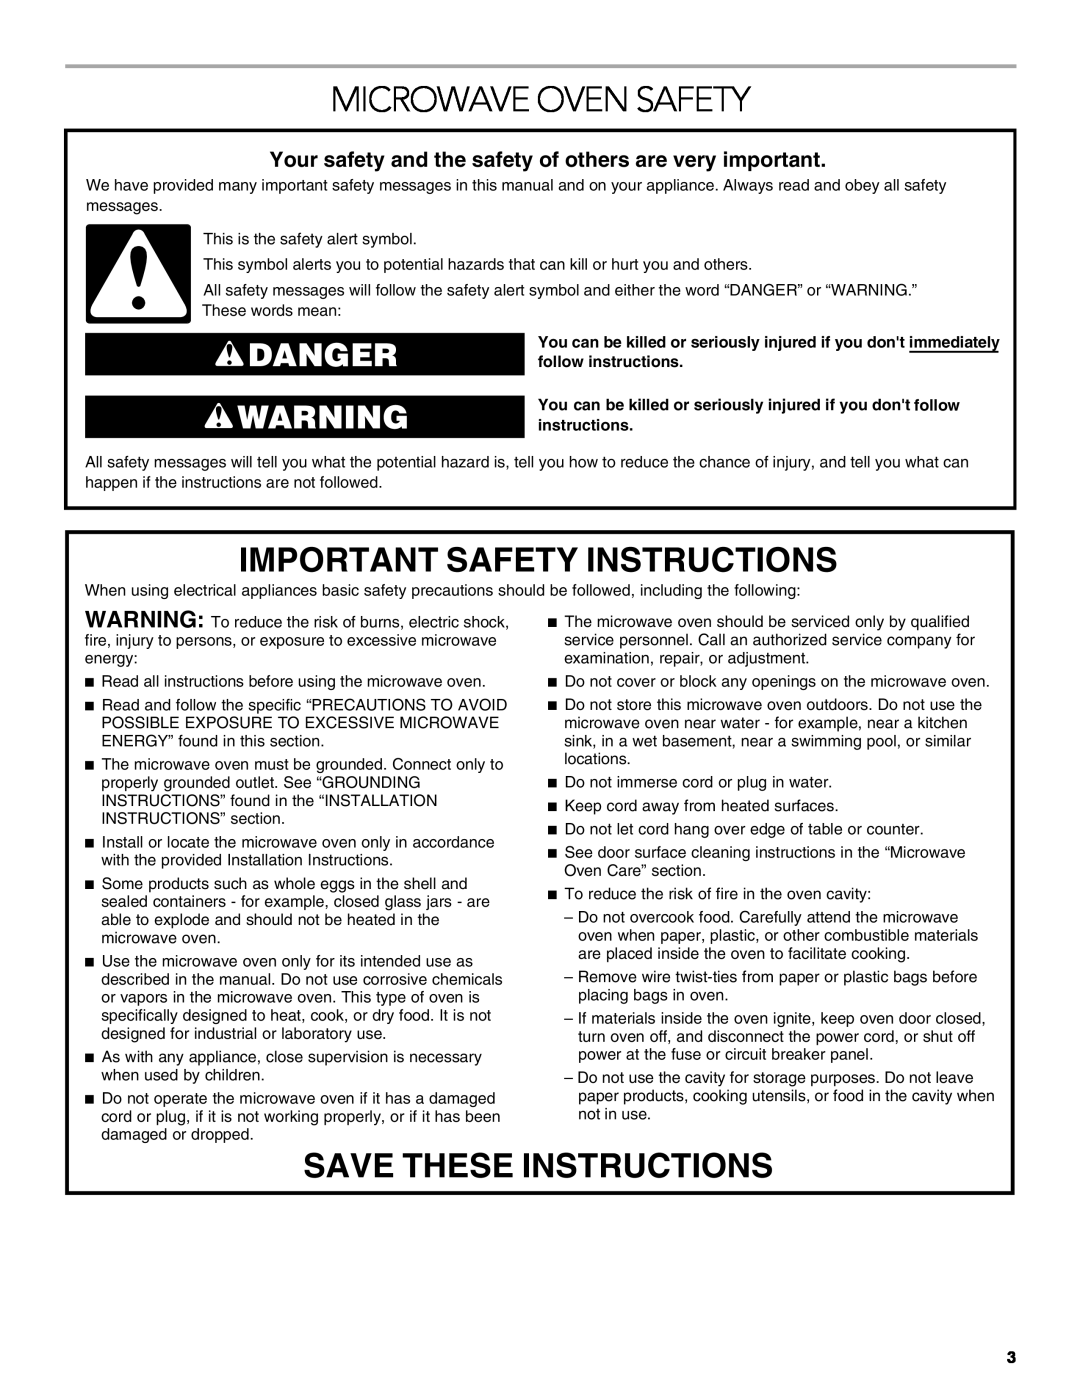 KitchenAid KCMC1575 manual Microwave Oven Safety, Important Safety Instructions, Save These Instructions, Danger 